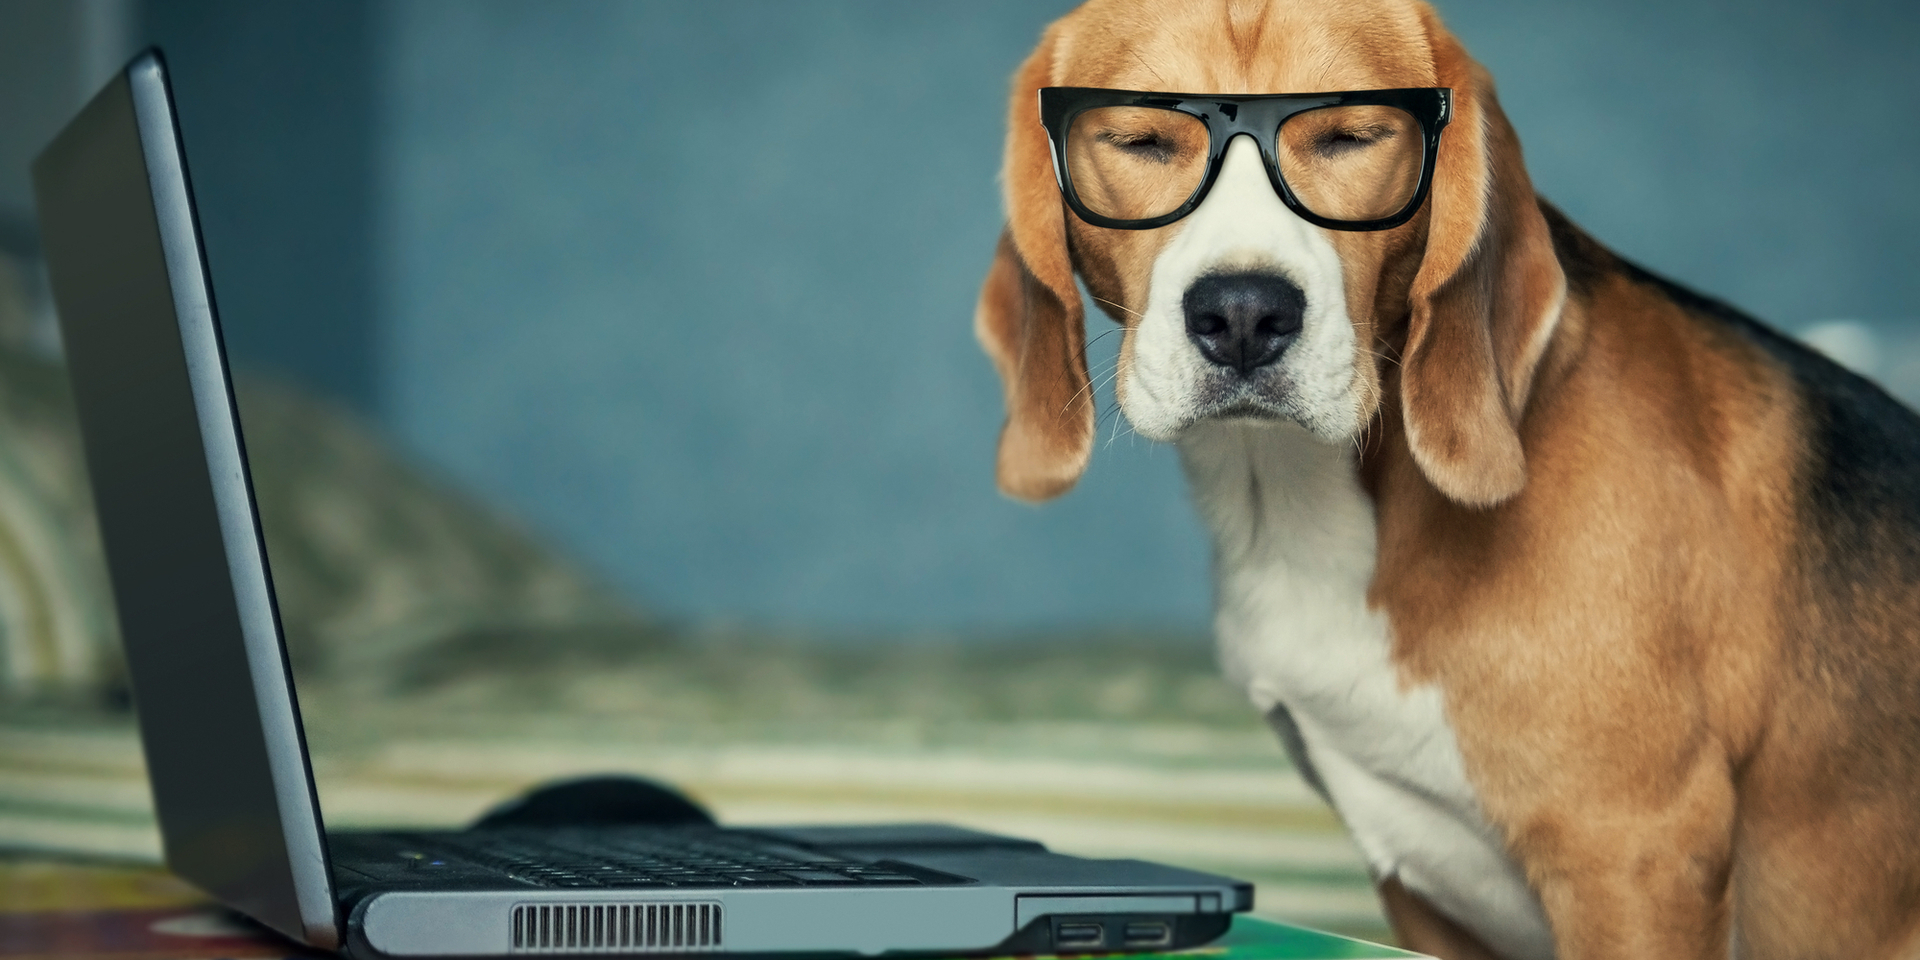 Dog looking clever in front of a laptop